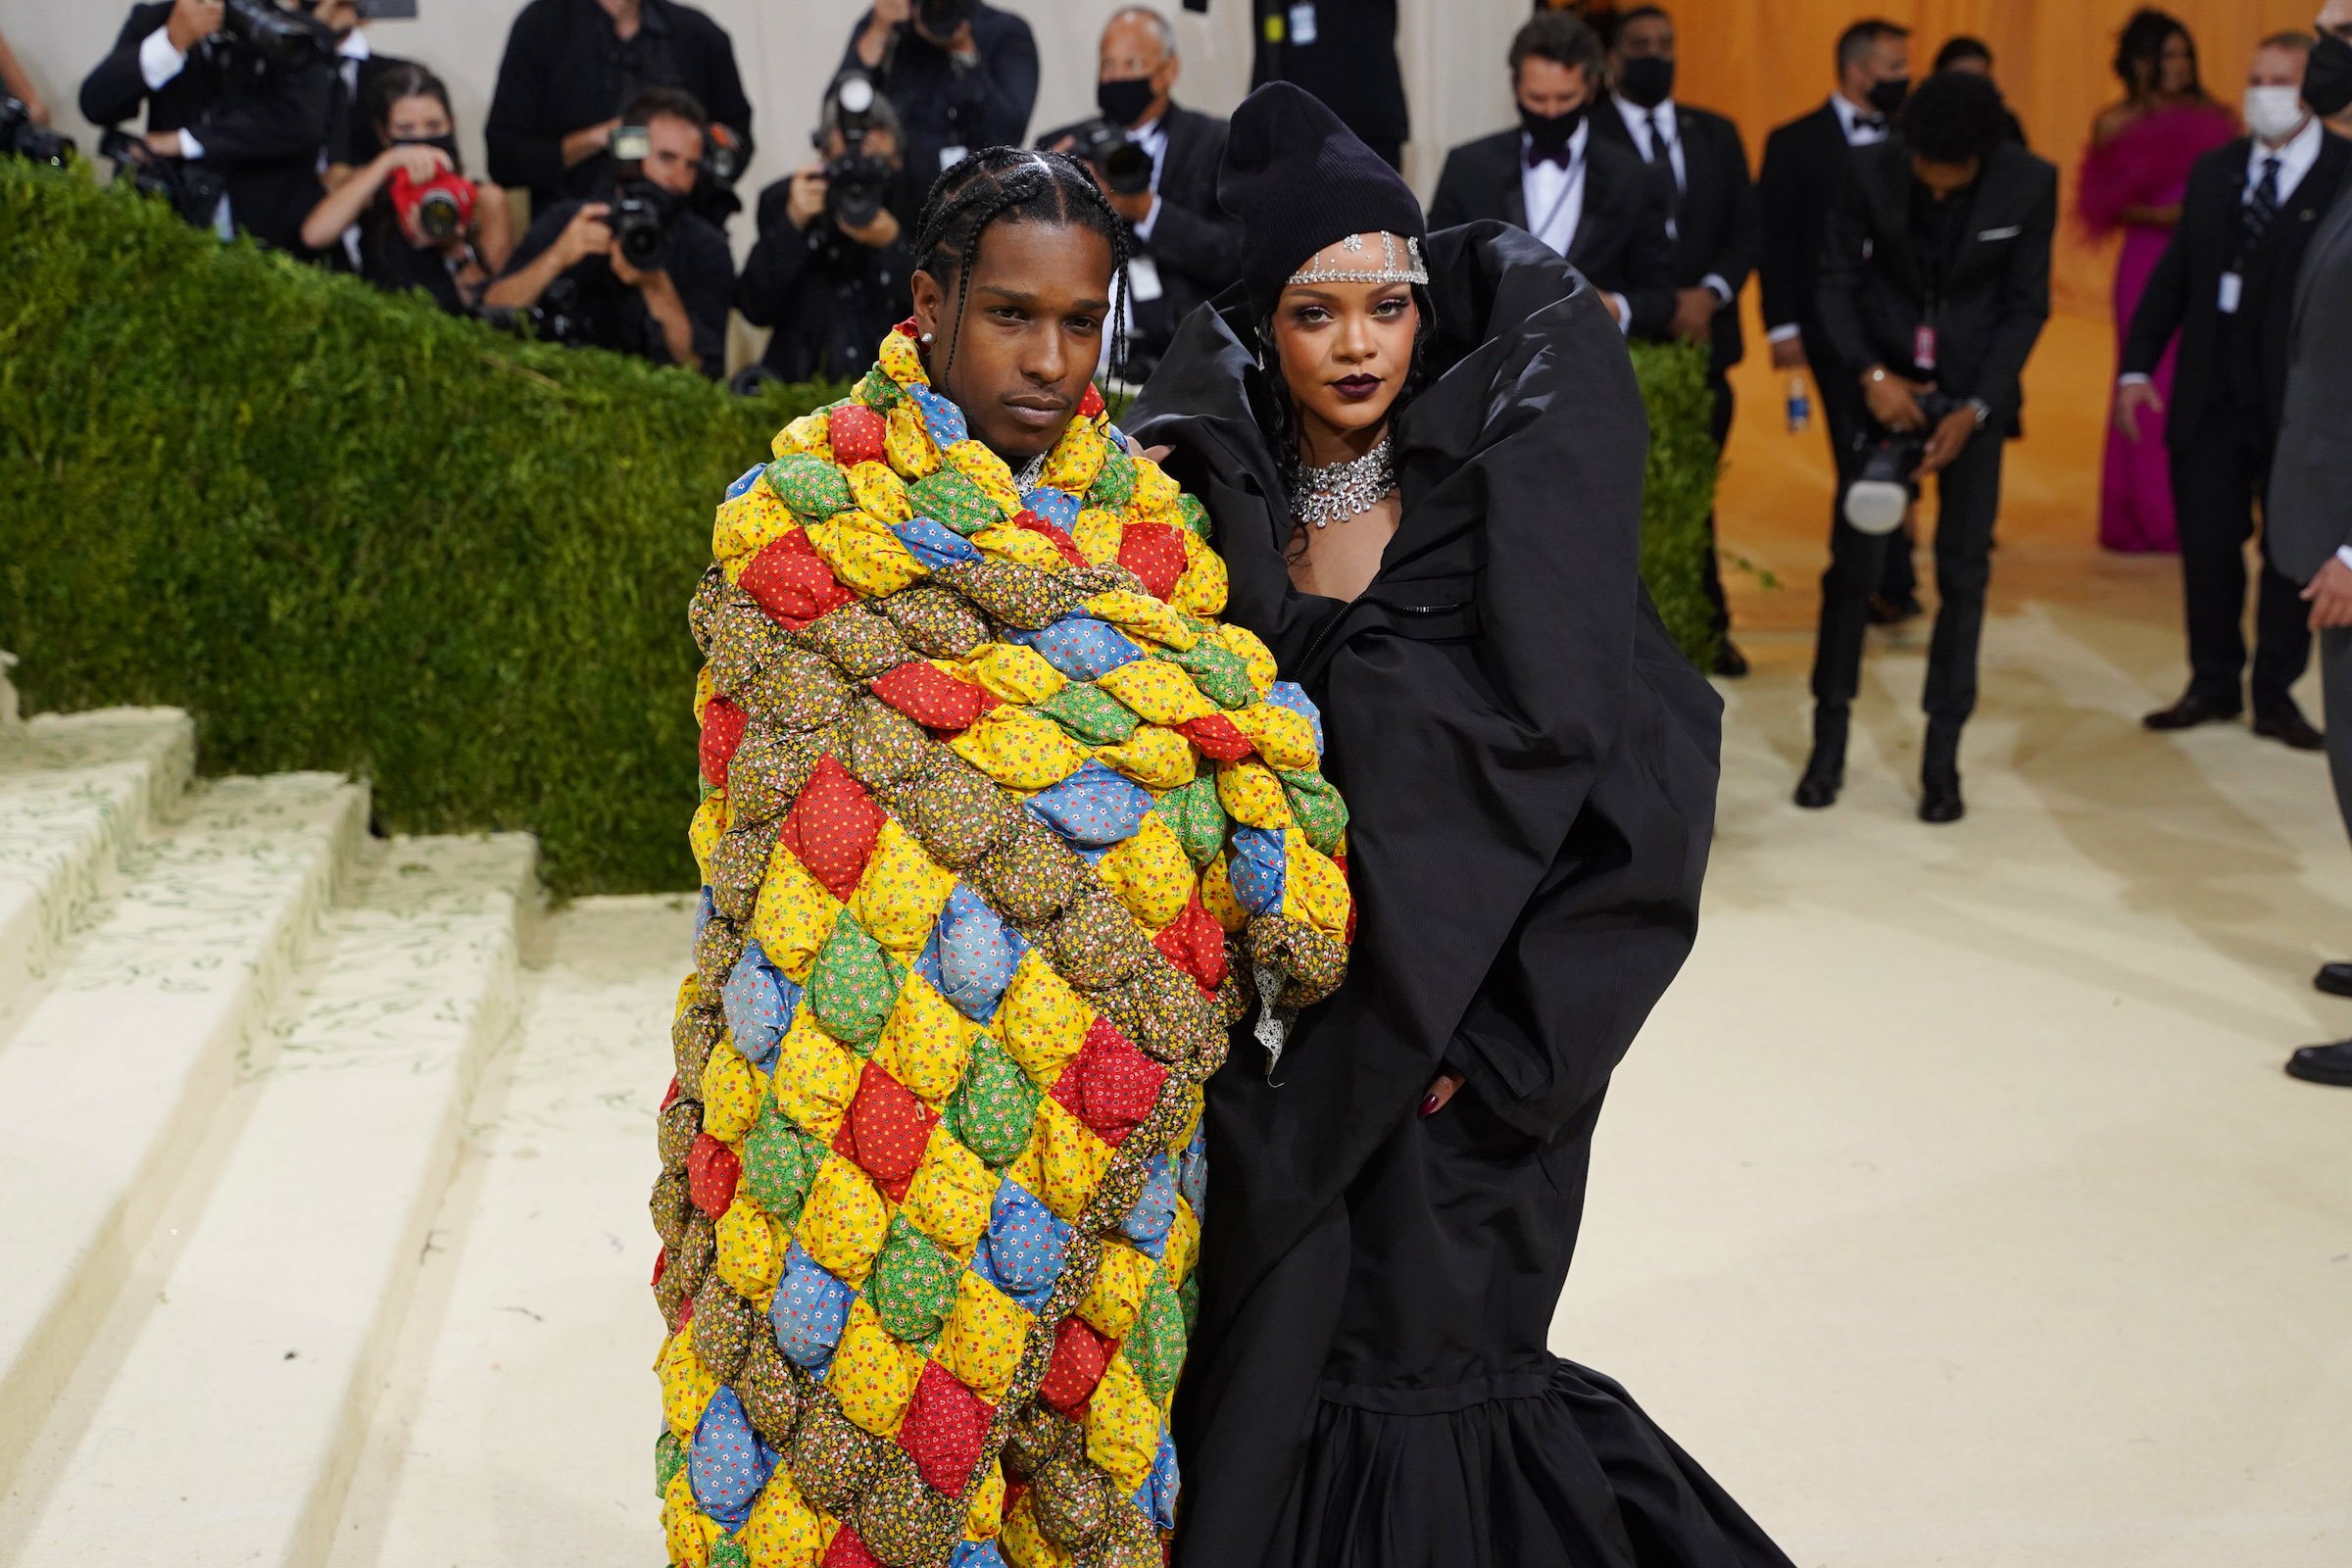 A$AP Rocky and Rihanna at the 2021 Met Gala